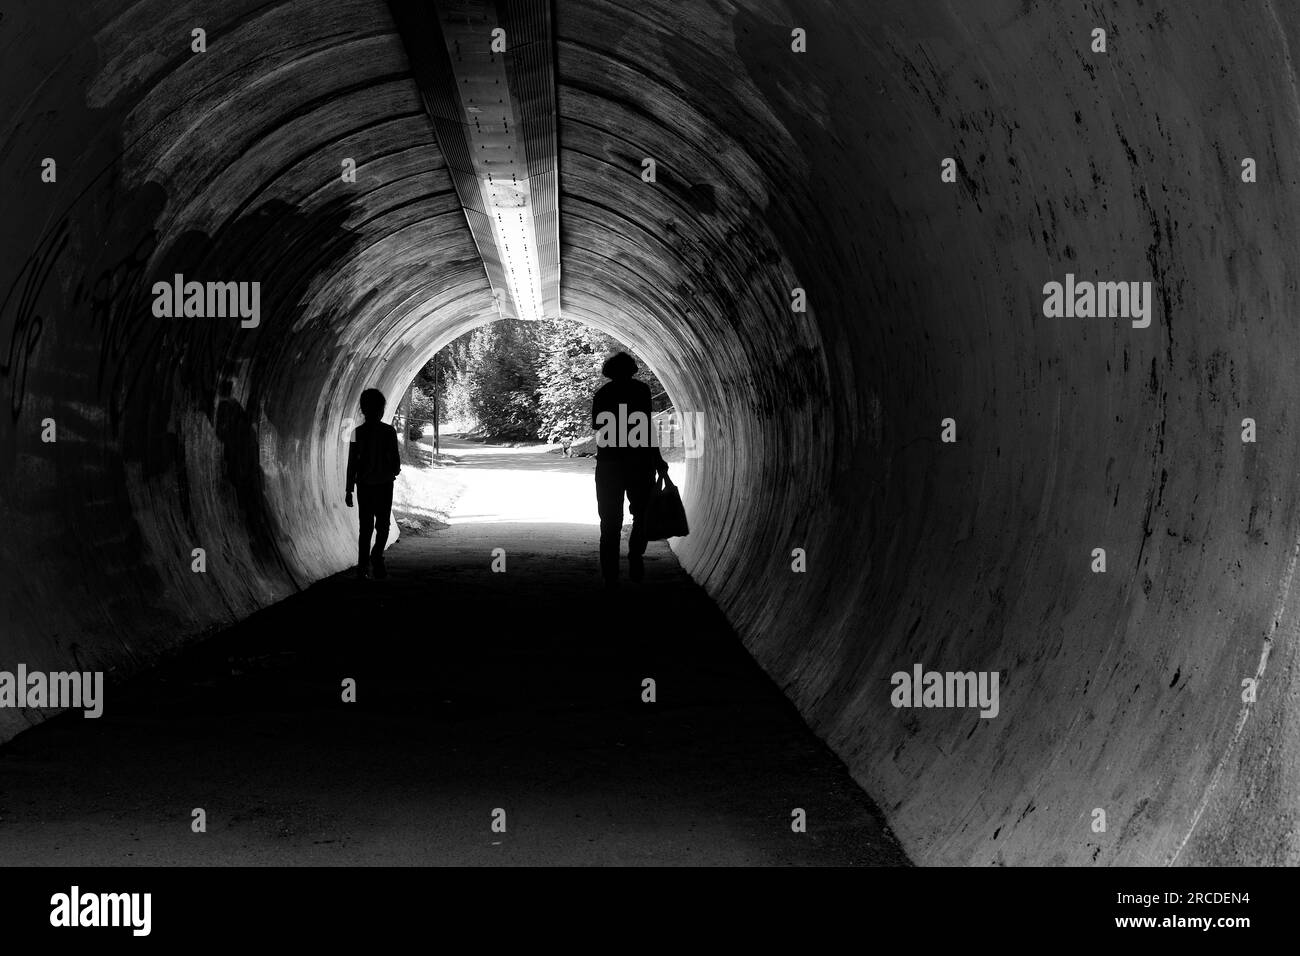 Grandmother and child in silhouettes in tunnel with dog waiting on the other side. Stock Photo